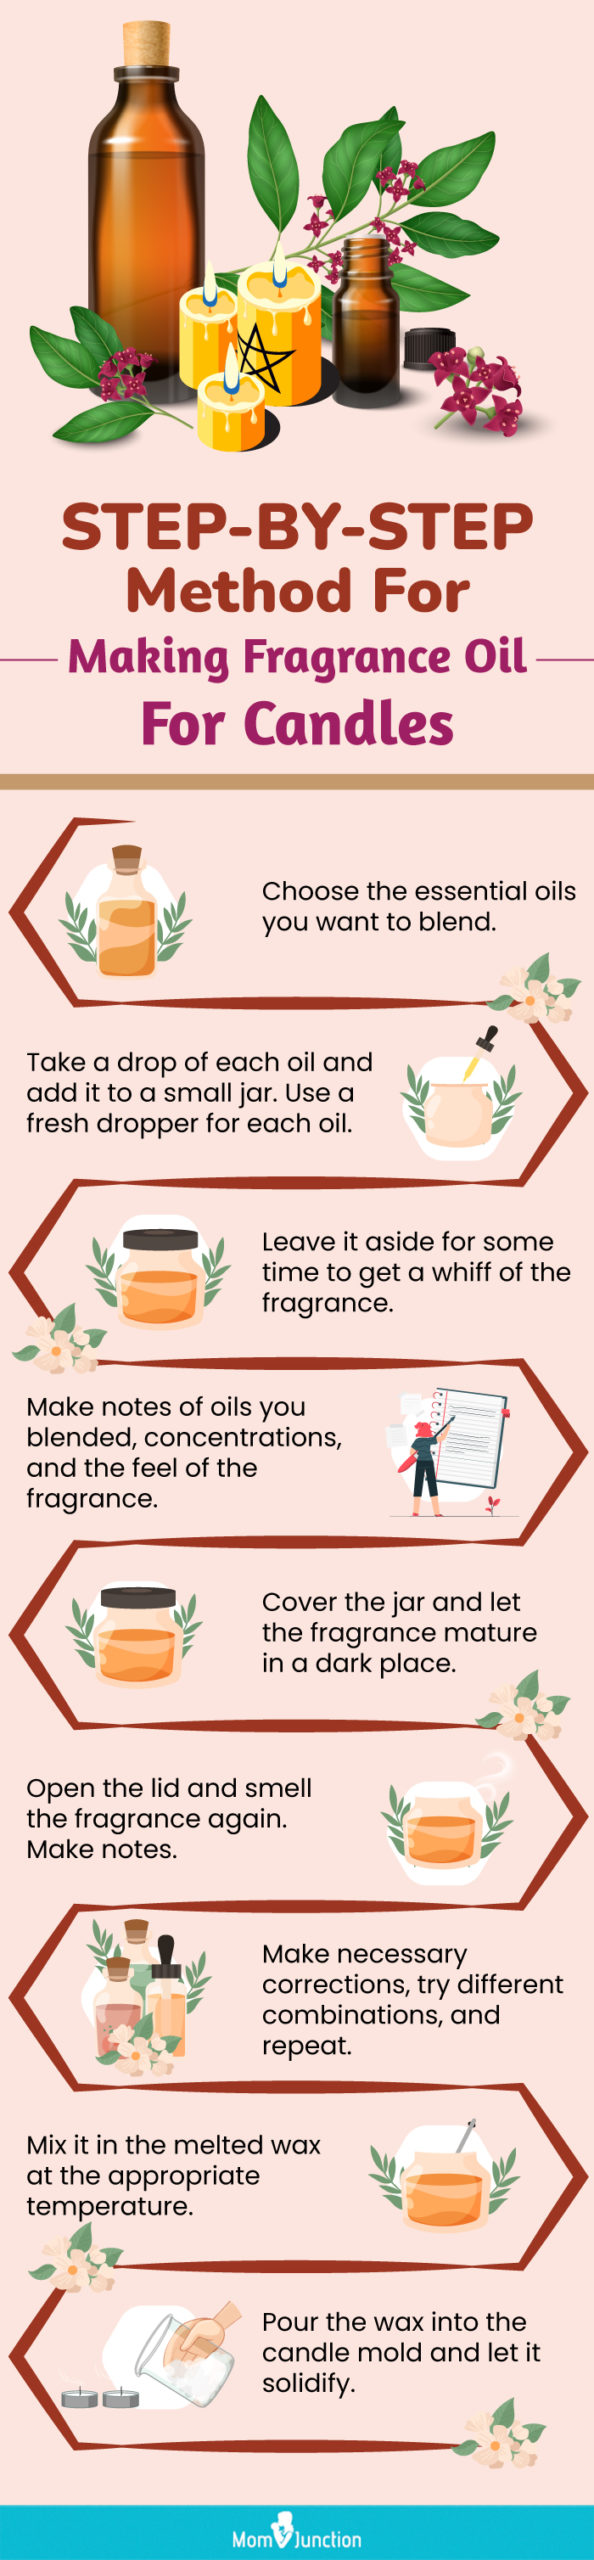 Blending Wax and Fragrance Oils